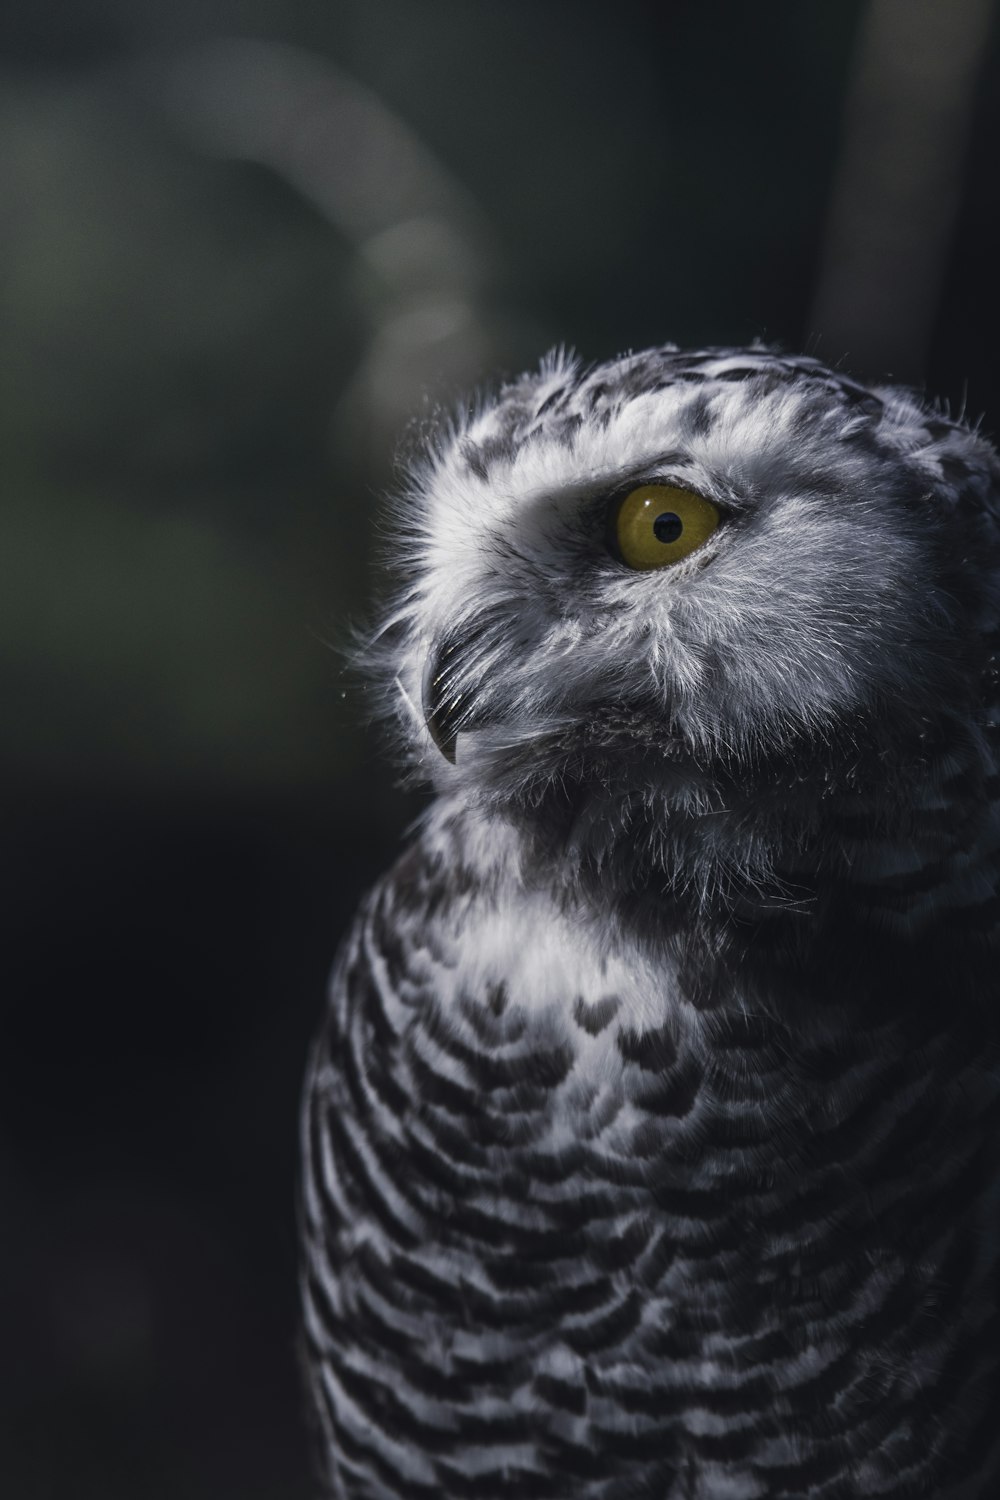 a black and white photo of an owl with yellow eyes